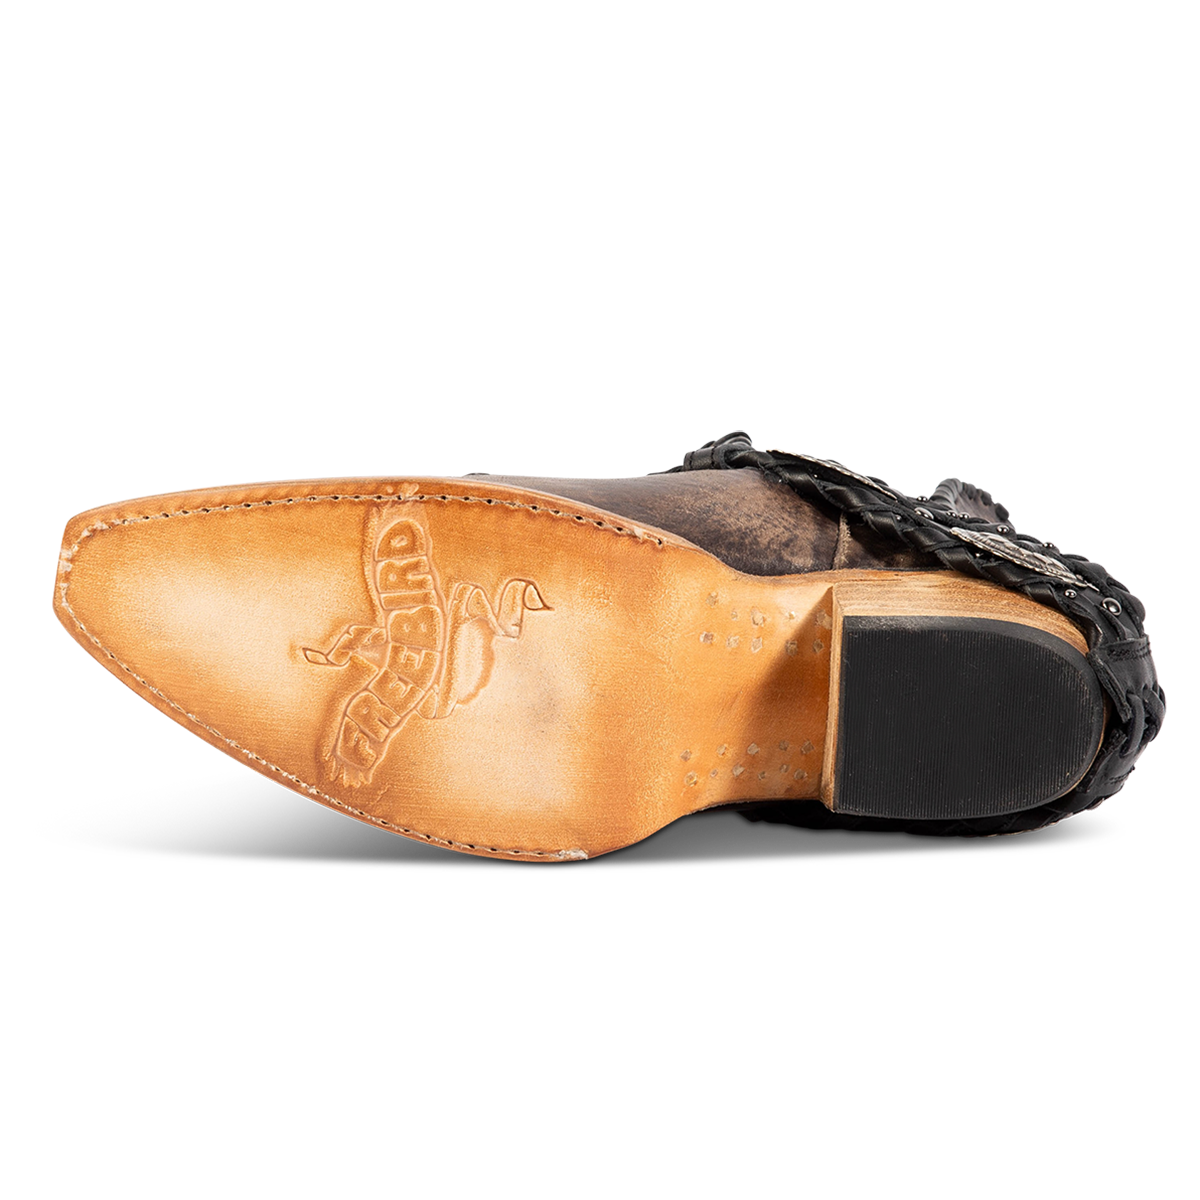 Leather sole imprinted with FREEBIRD 